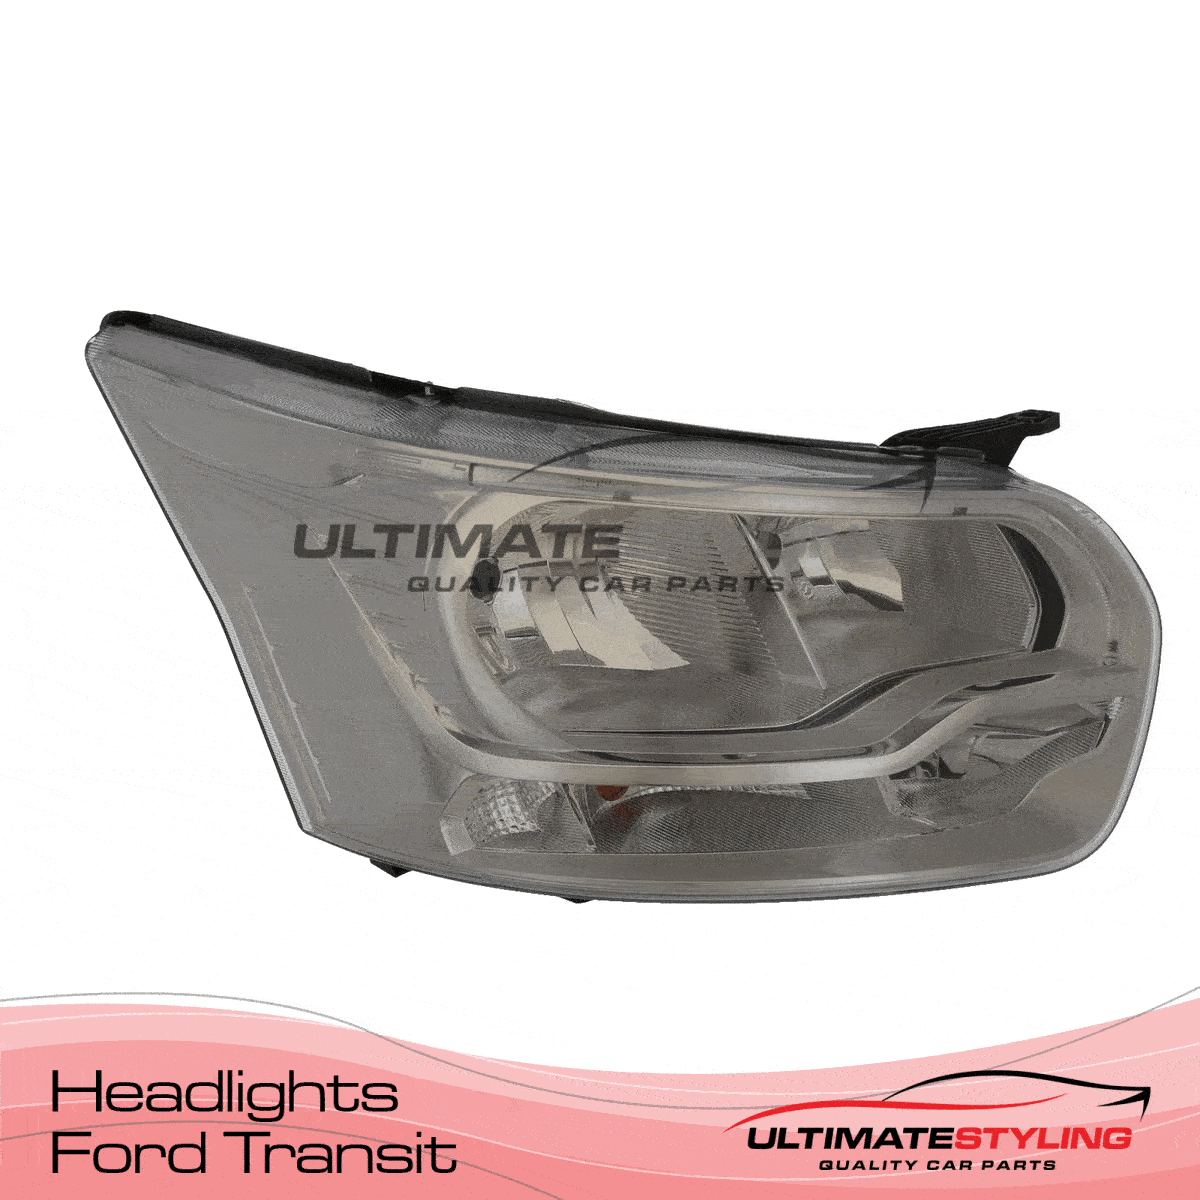 360 view of a Ford Transit headlight